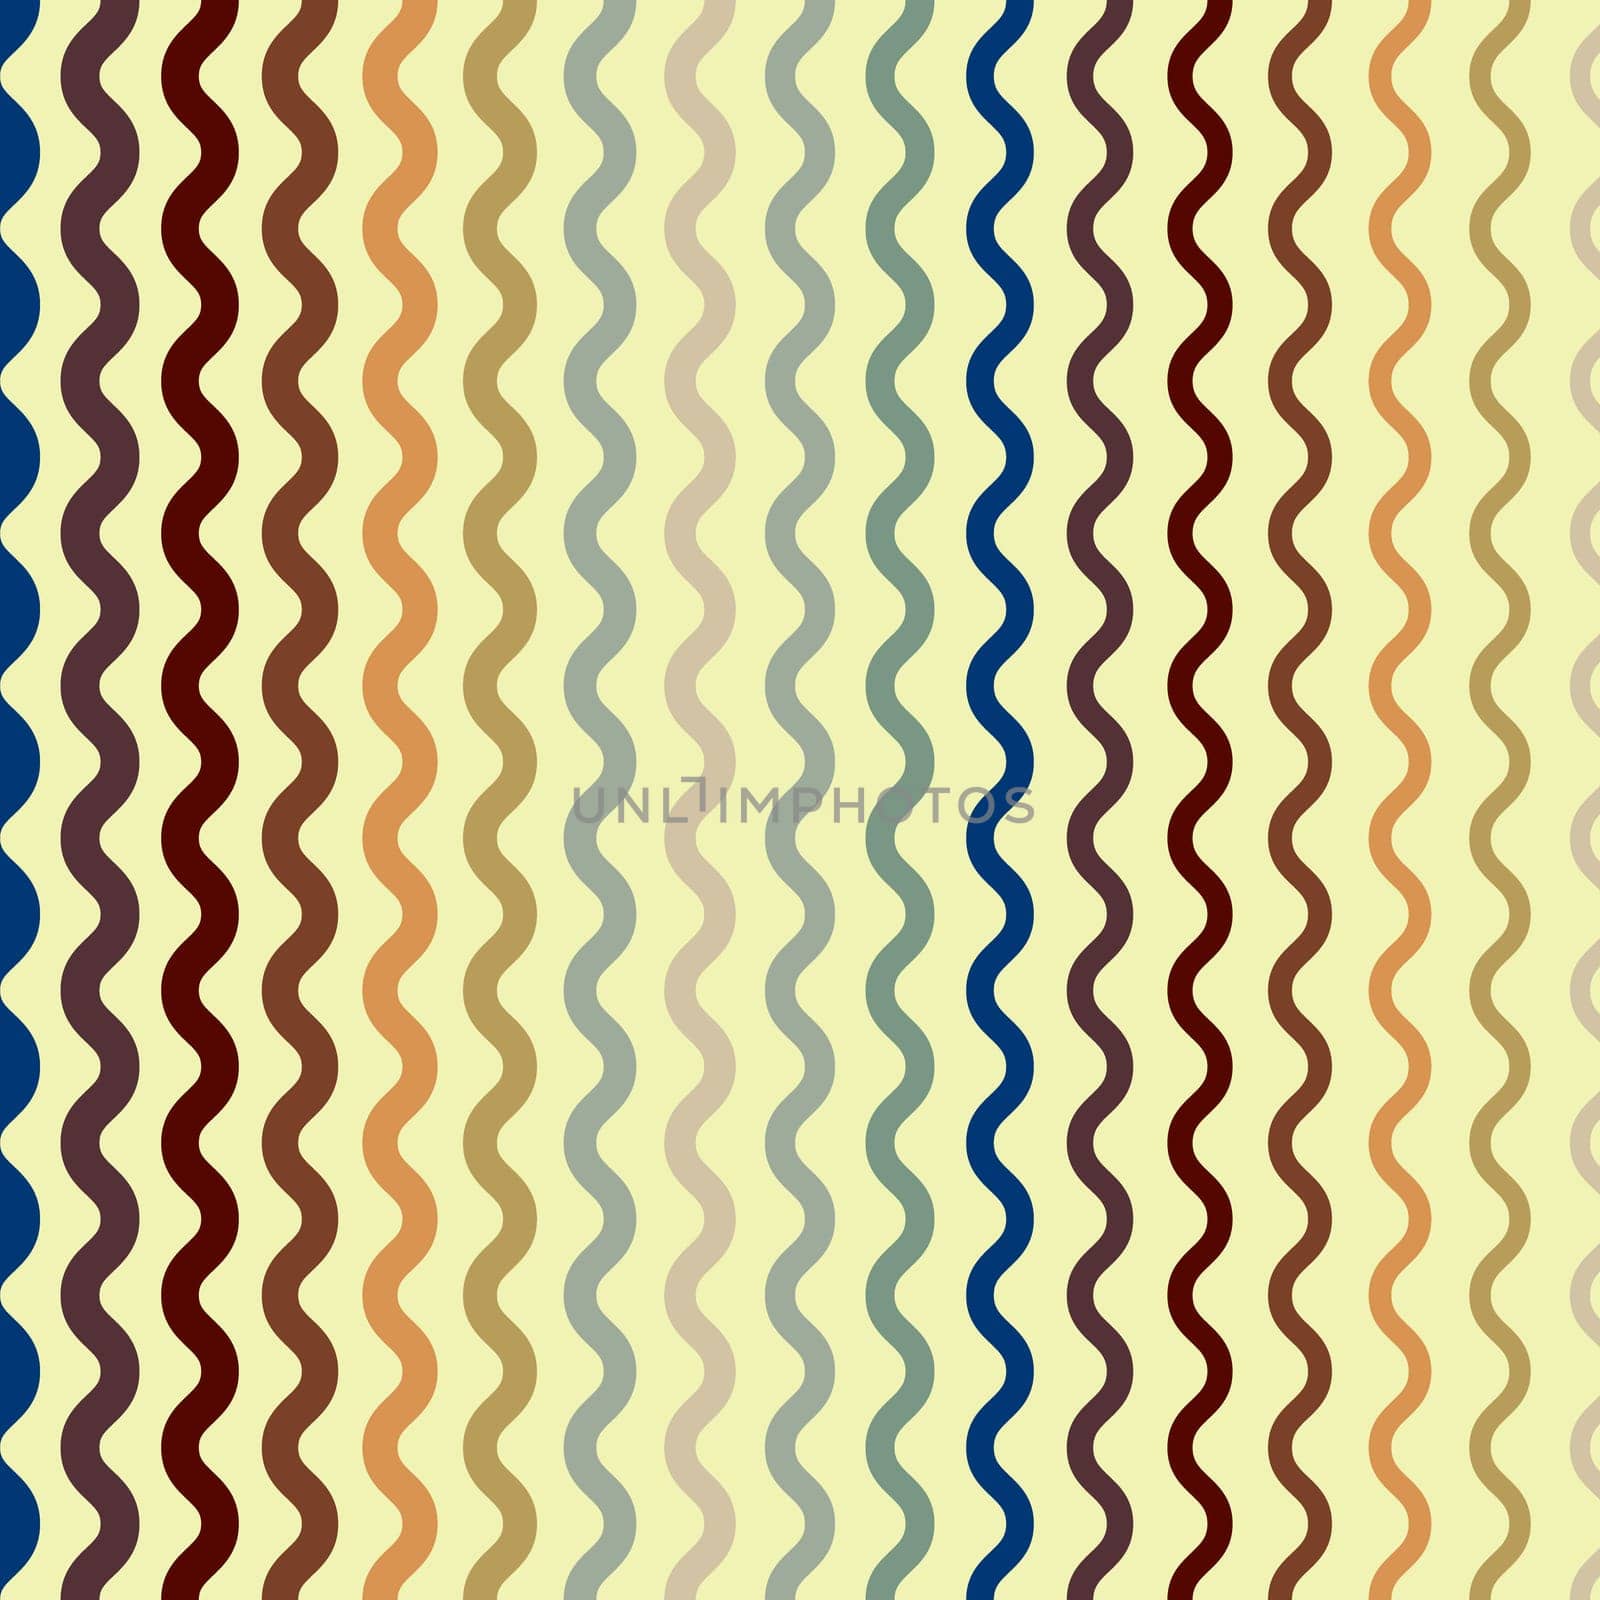 Monochrome Retro groovy psychedelic wavy background. illustration in the style of 1970